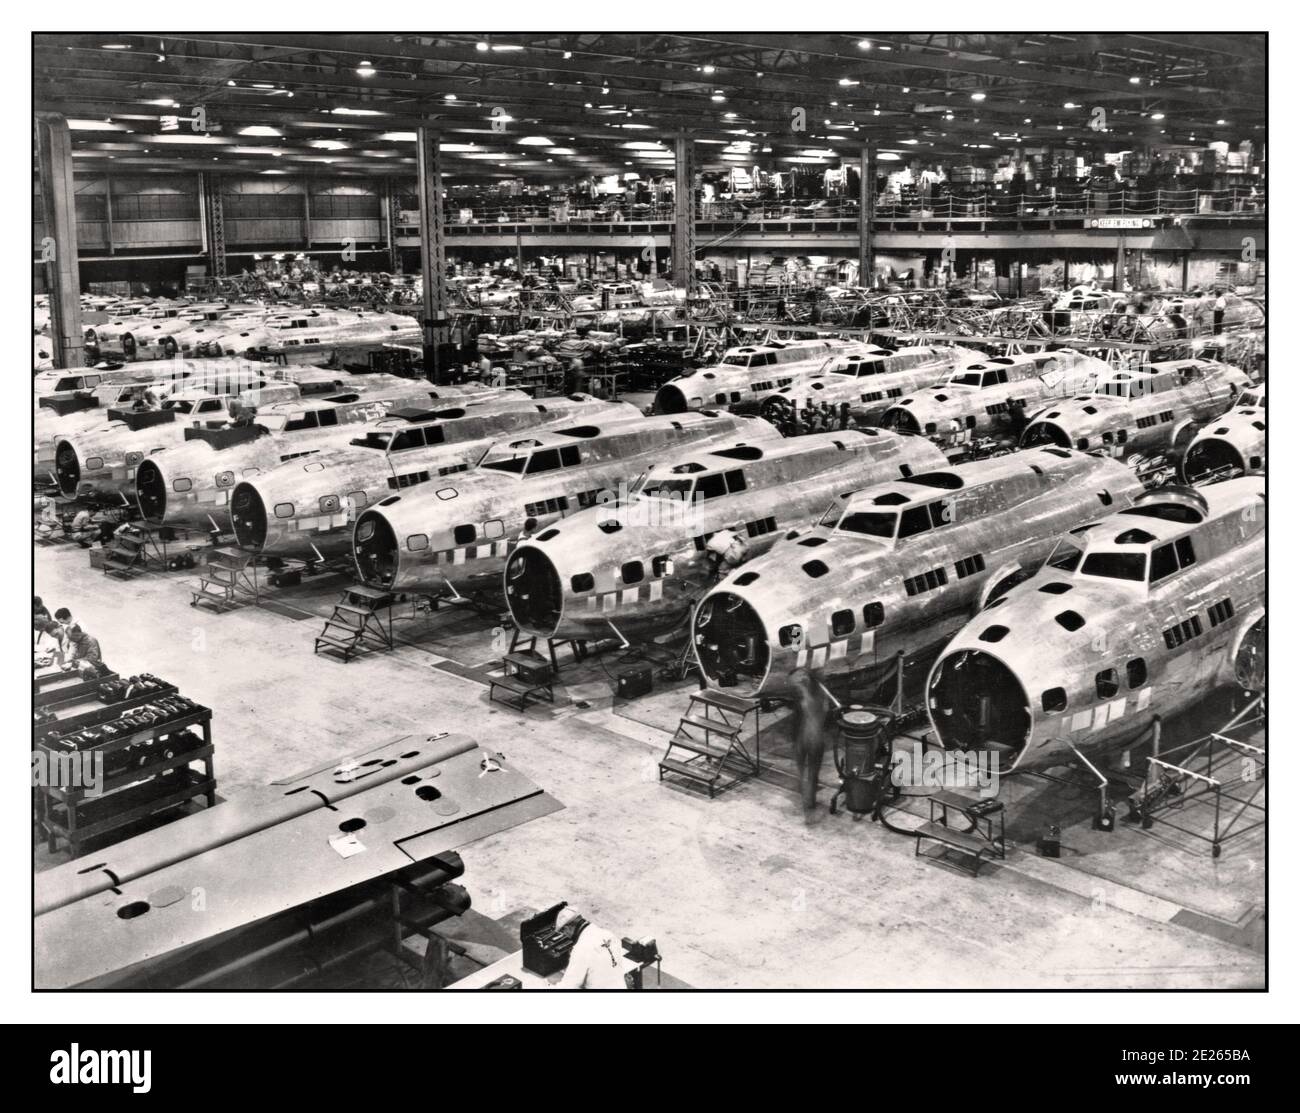 BOEING B -17 WW2 ASSEMBLY FACTORY 1943 WW2 World War II Propaganda image of numerous Bomber Plane Manufacture Boeing B-17E Flying Fortresses under construction at the Boeing plant in Seattle in 1943. Stock Photo